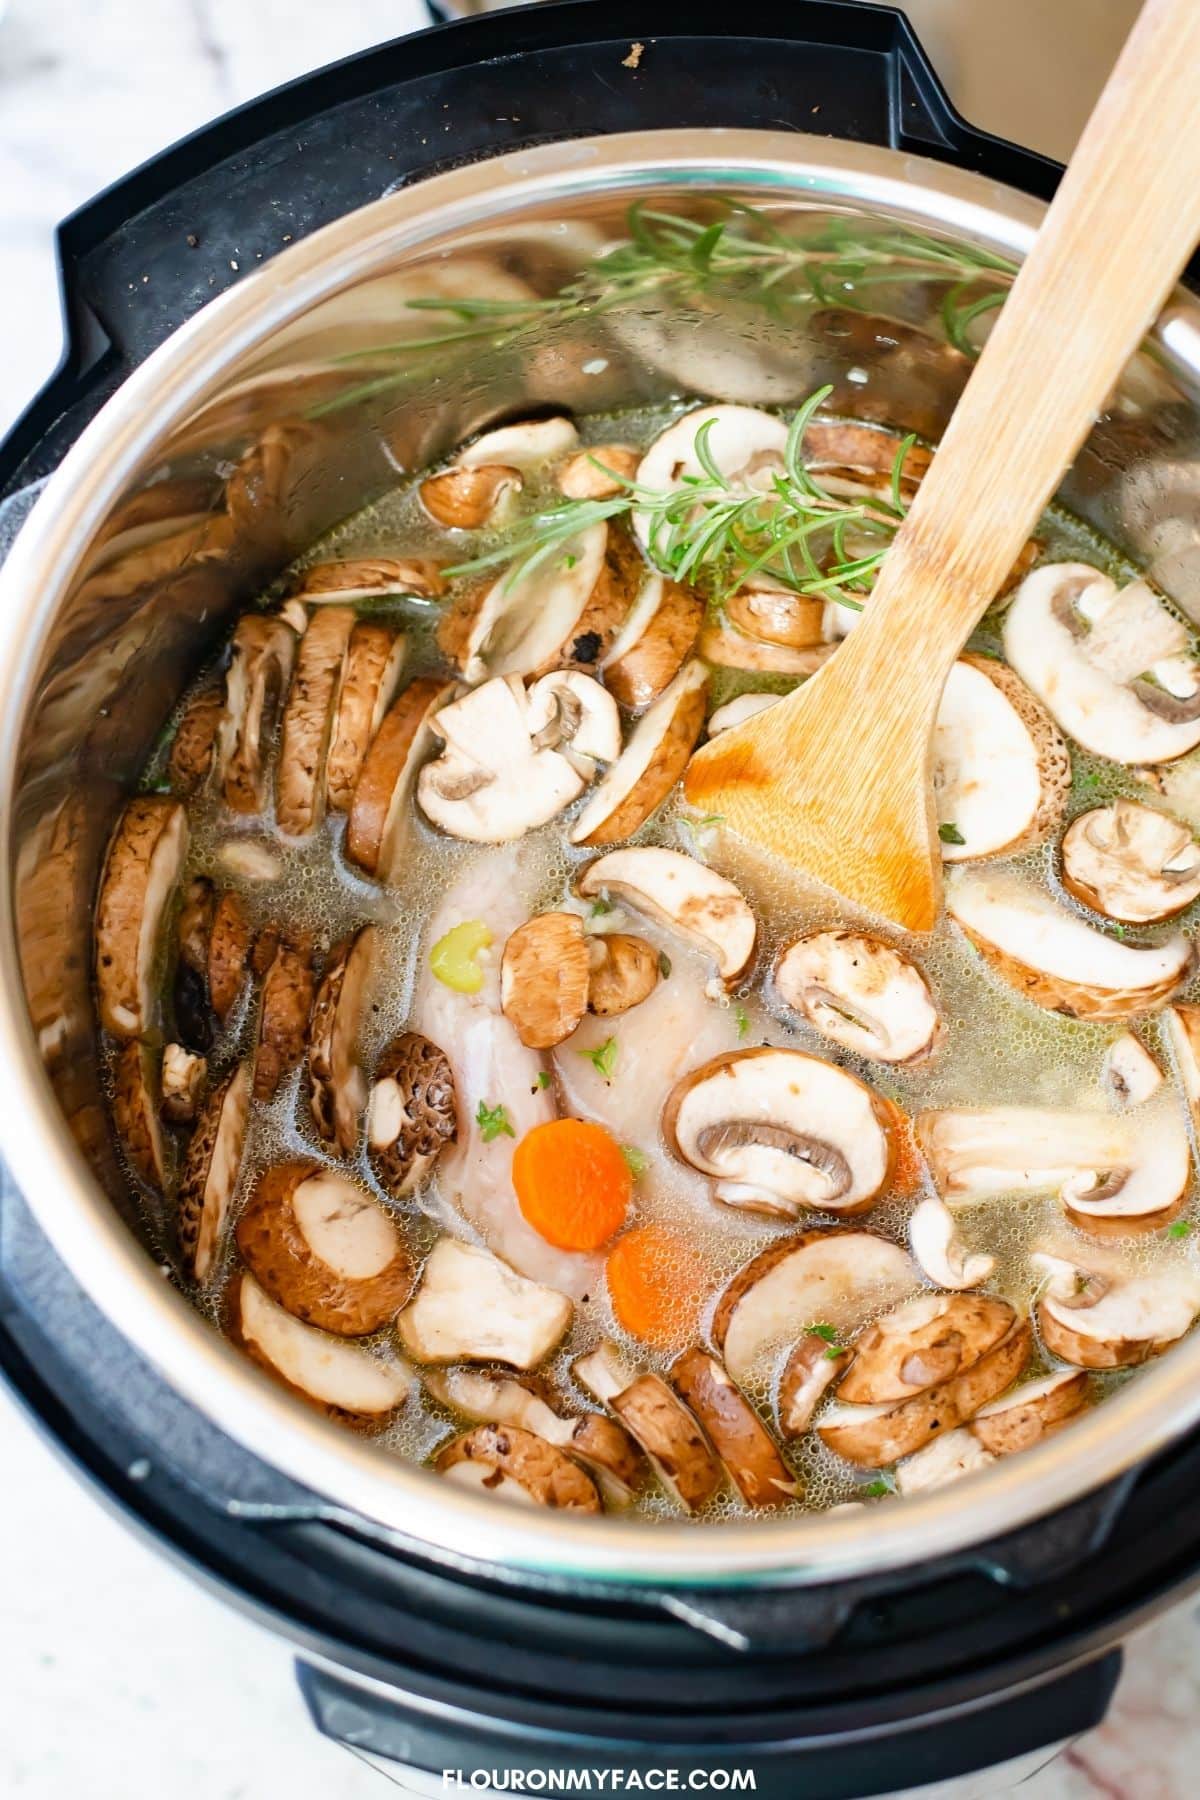 Instant Pot Chicken Wild Rice Soup recipe ingredients in the pressure cooker before cooking.